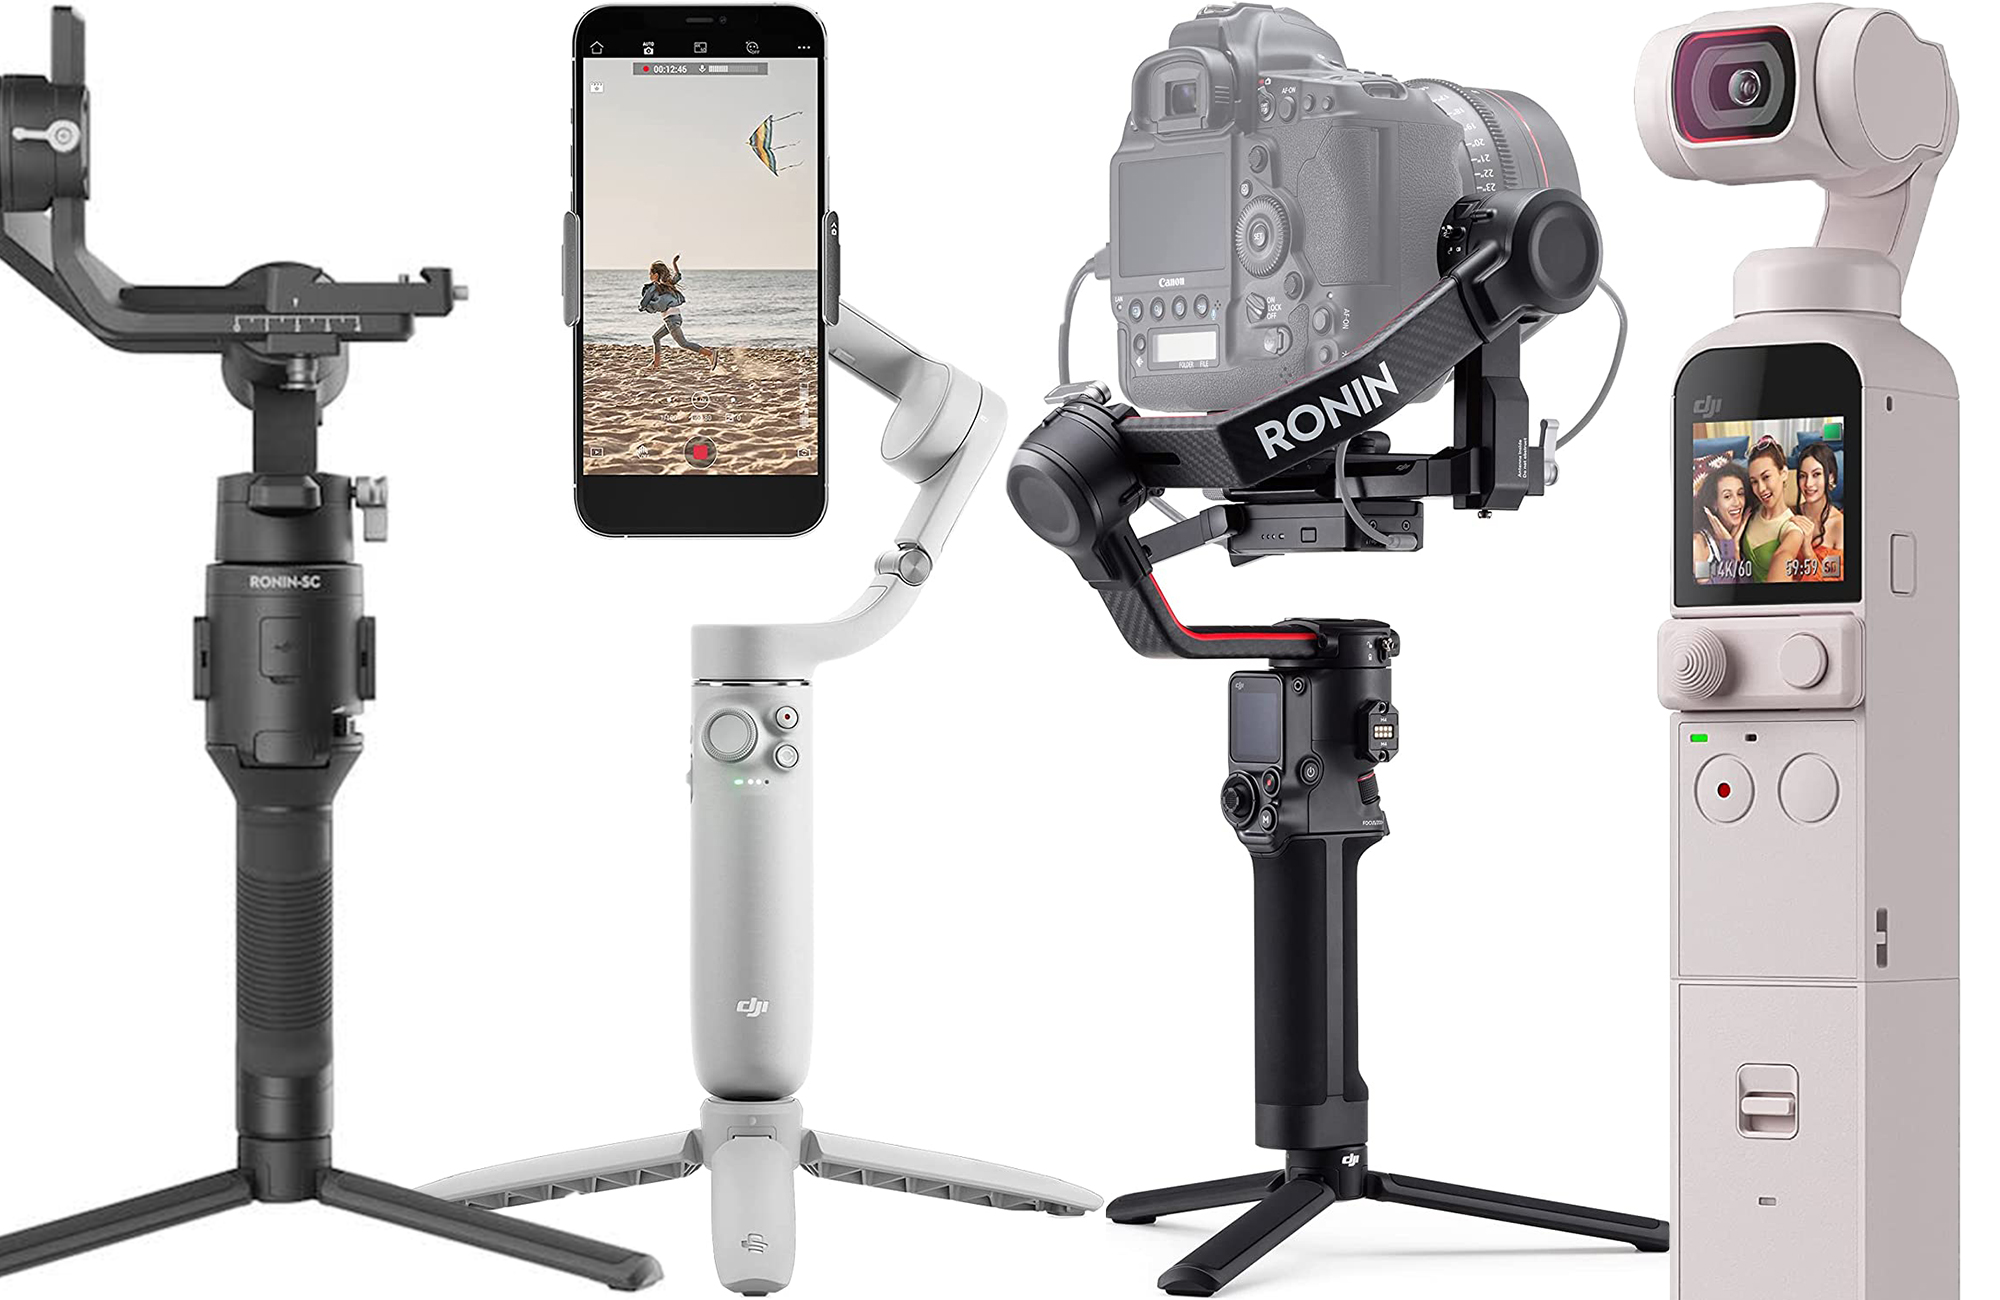 All I Want For Christmas Is A DJI RS 4 Gimbal Stabilizer!